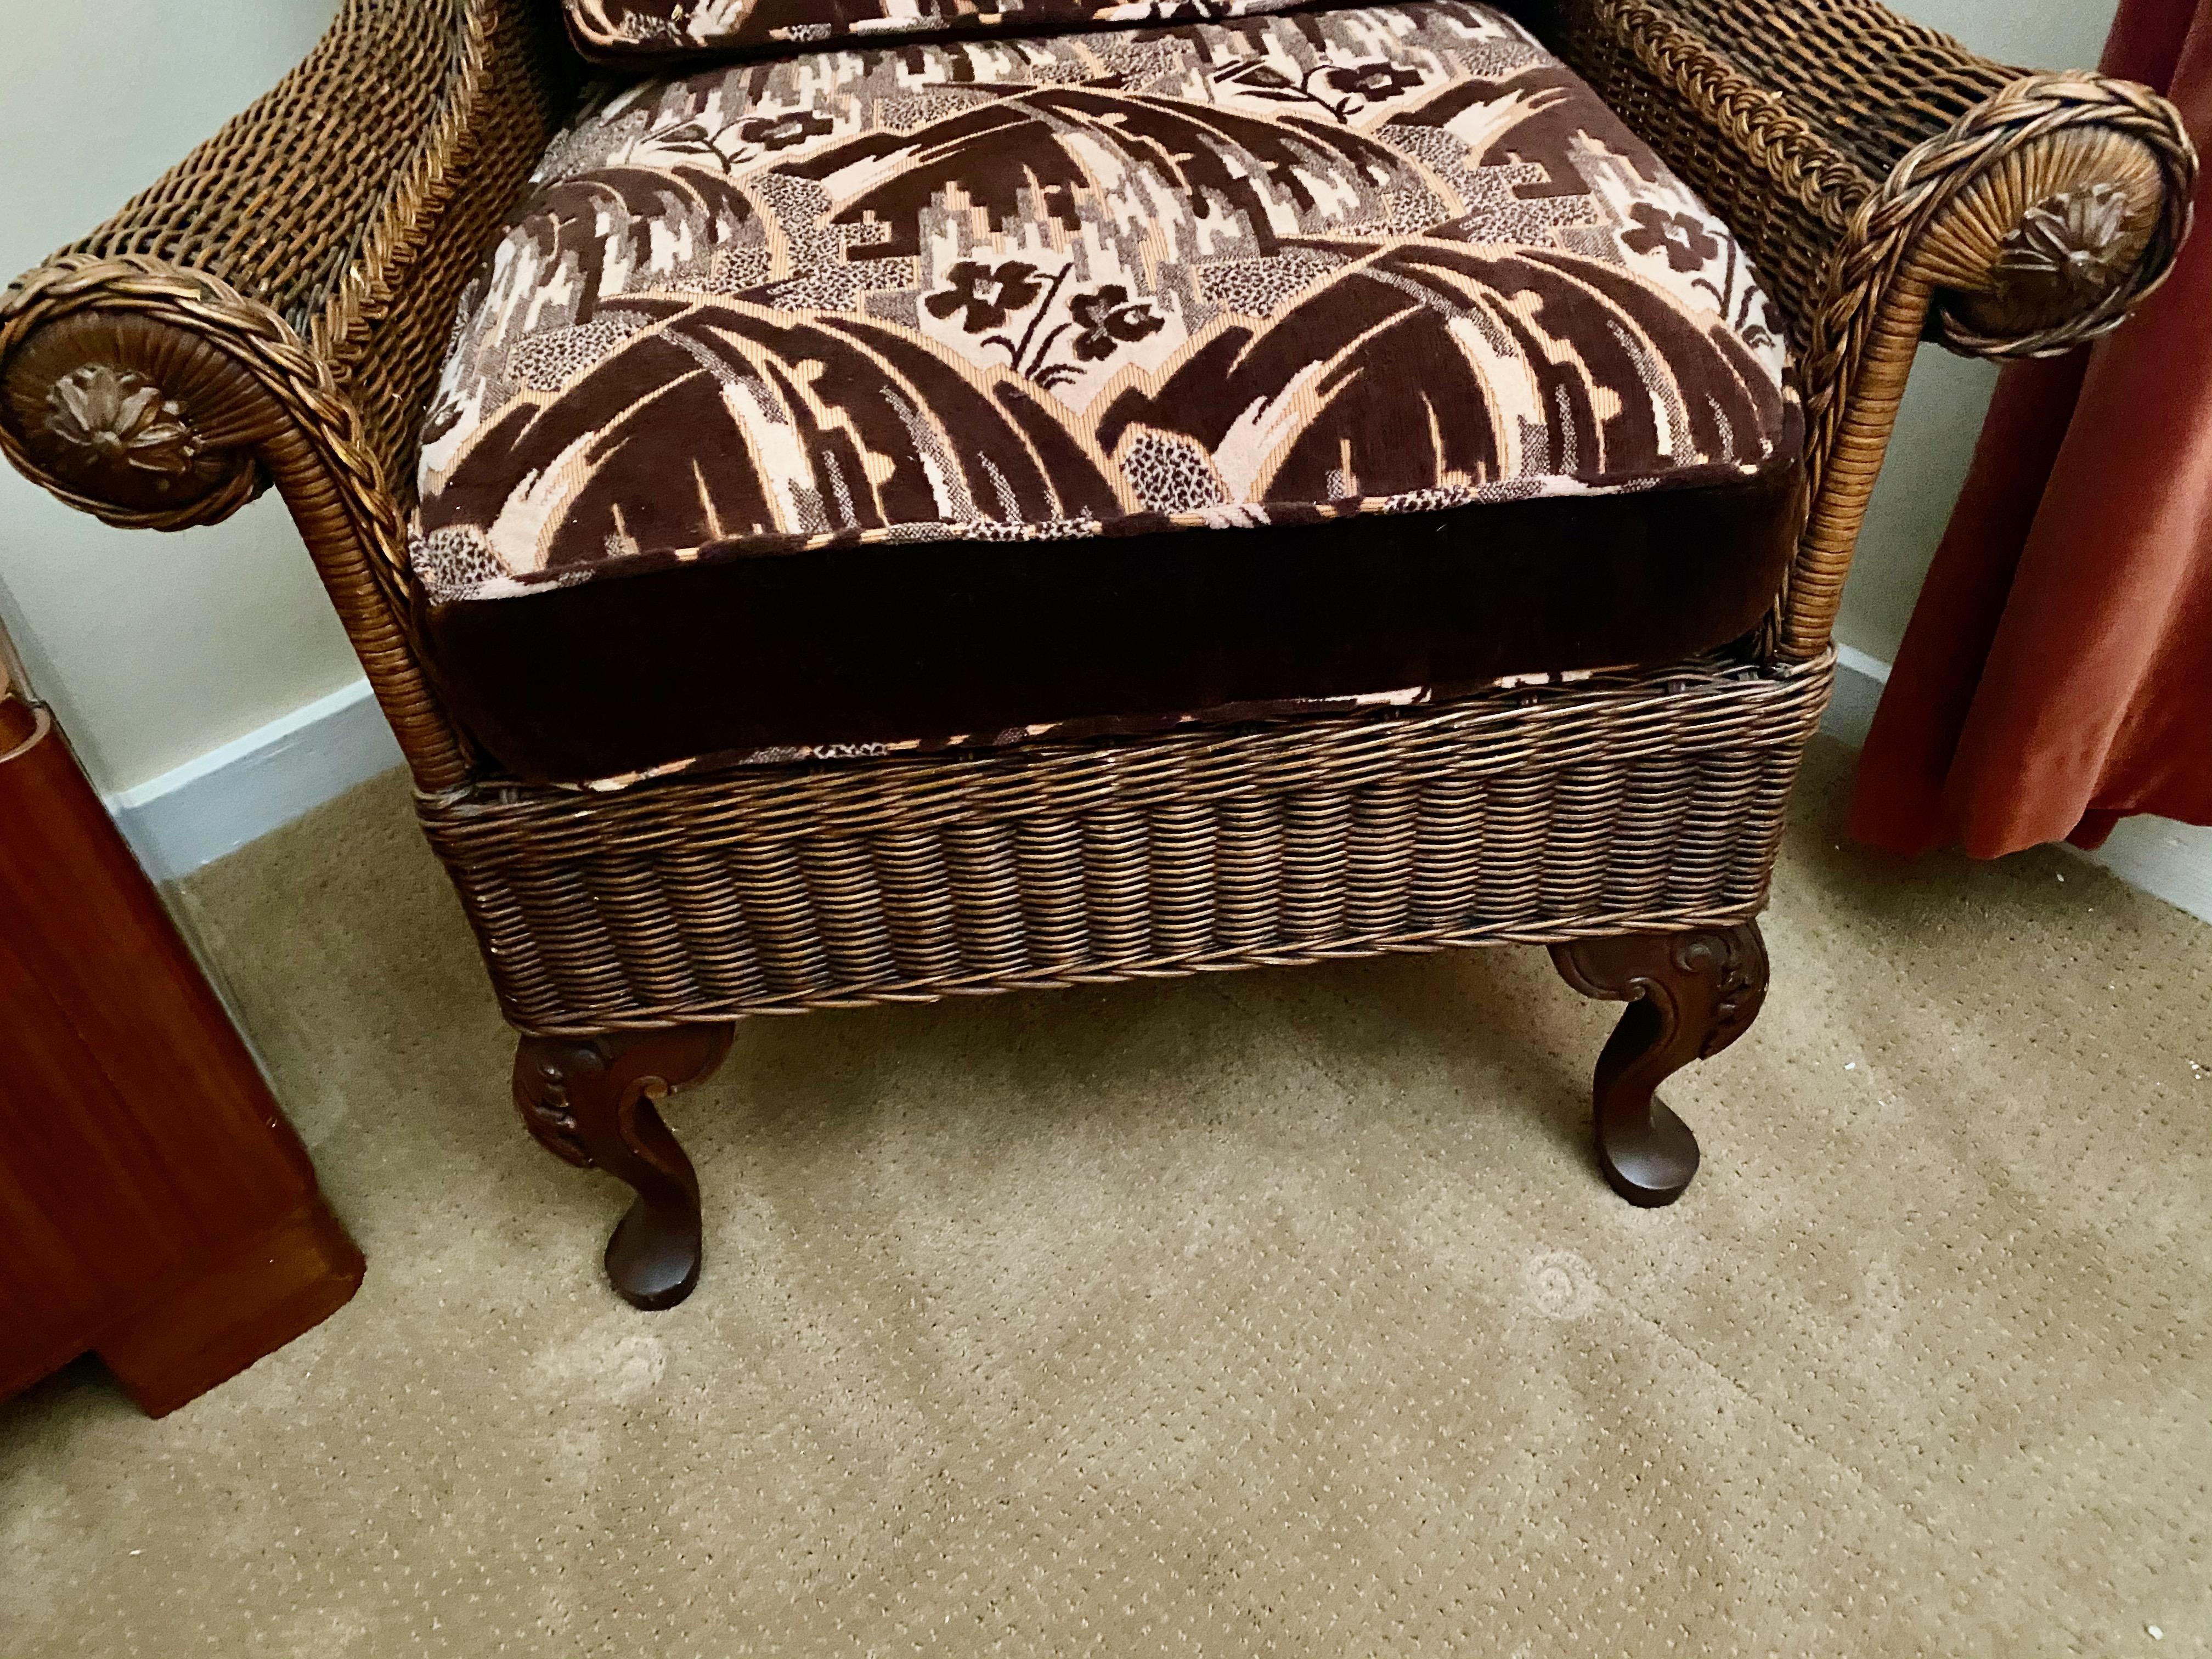 Wicker High Back Art Deco Chair and Stool with Original Fabric In Good Condition For Sale In Oakland, CA